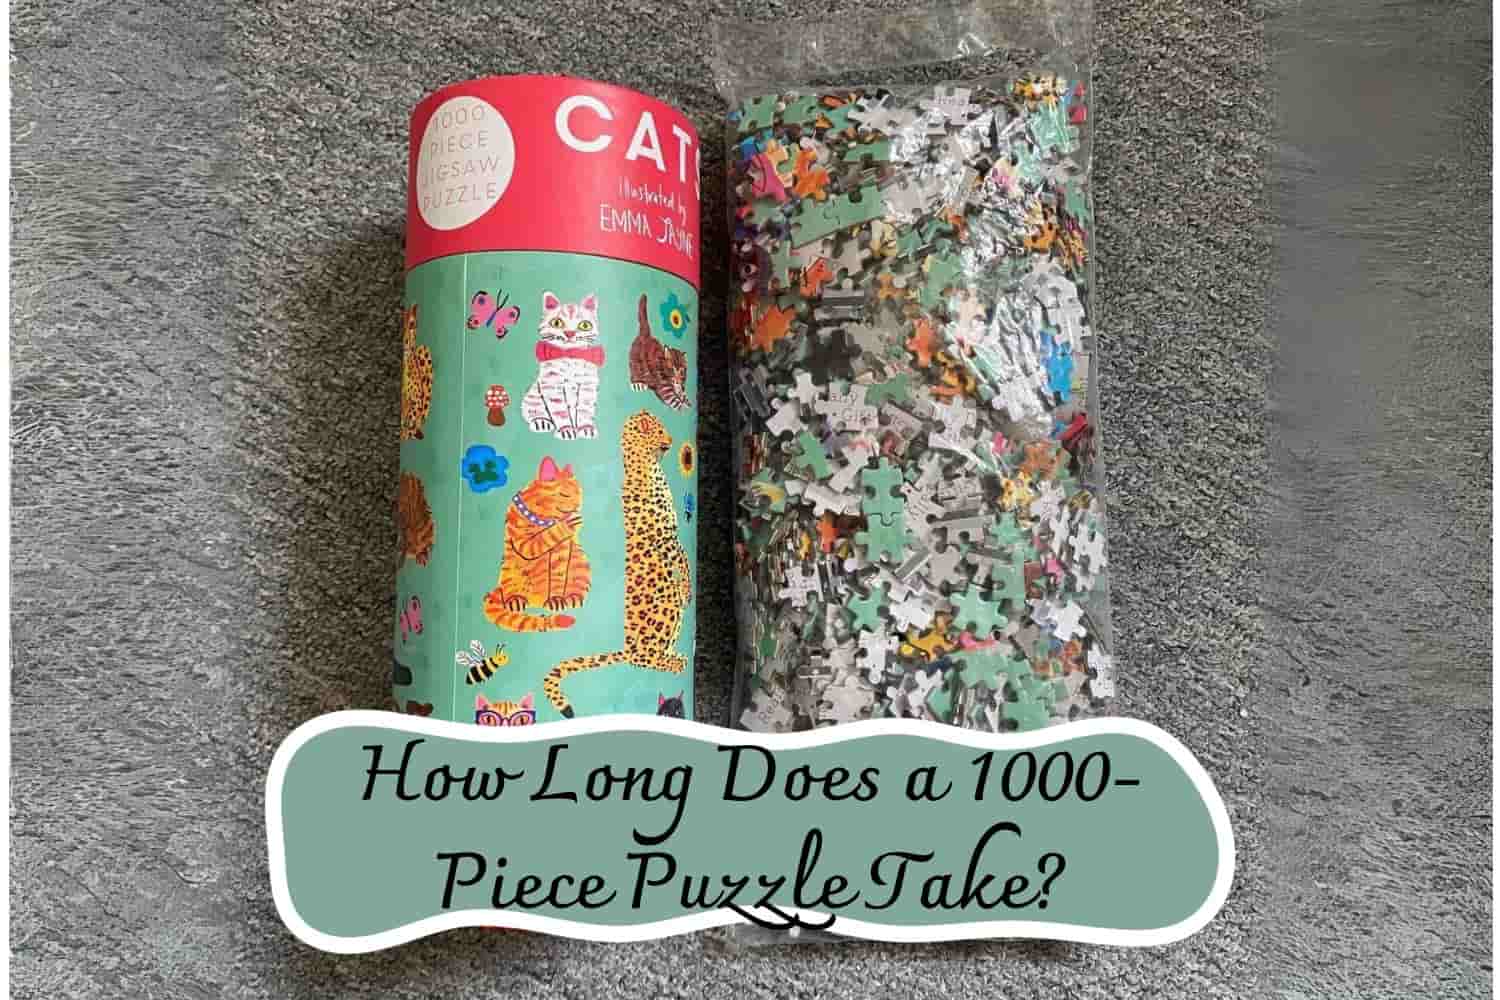 How Long Does a 1000-Piece Puzzle Take